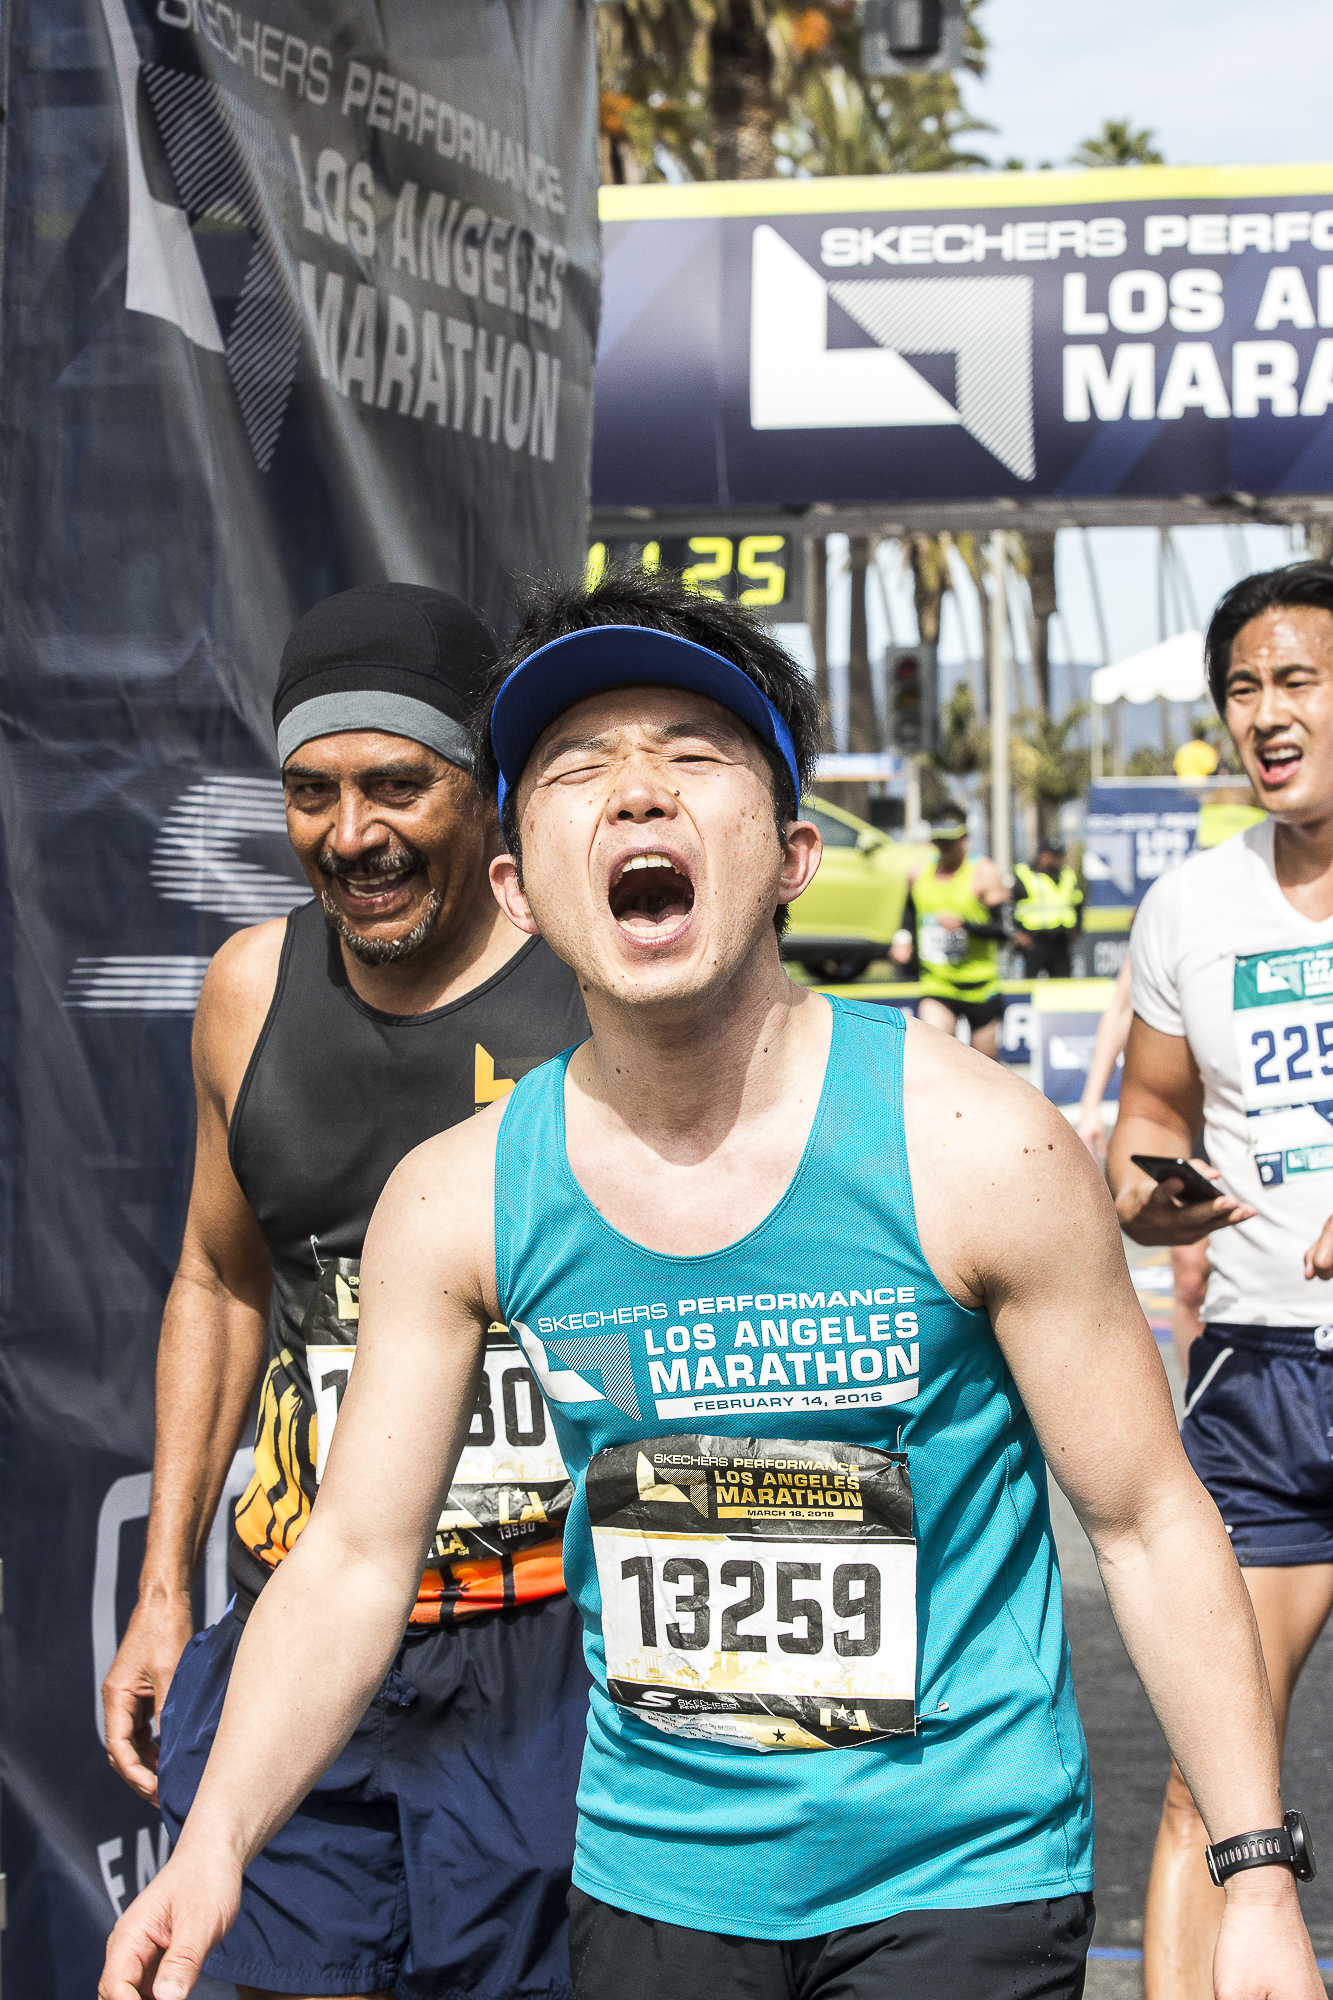  Toshihiko Tateshita (bib #13259) (center) screams with joy after completing the 33rd annual Los Angeles Marathon event with a final time of 3:52:36 in Santa Monica, California on Sunday March 18, 2018. “I did it…I finally did it! And no one can take